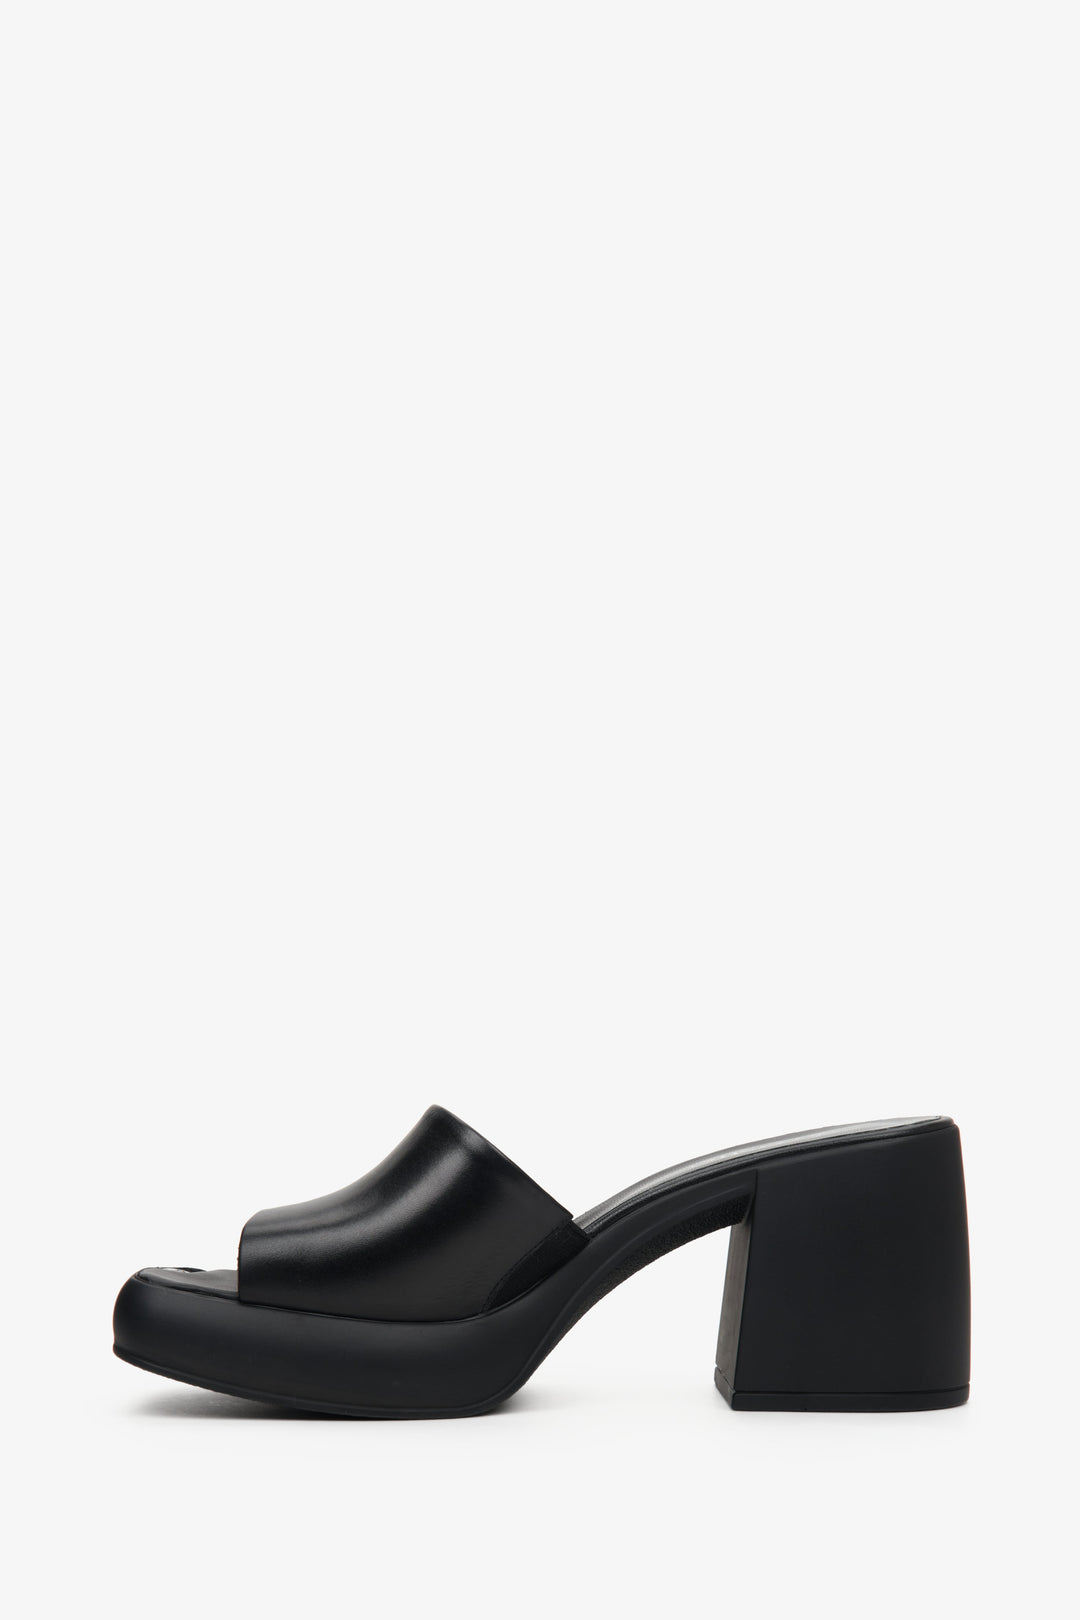 Stylish black mules for women made of natural leather on a square heel - the profile of the shoes.